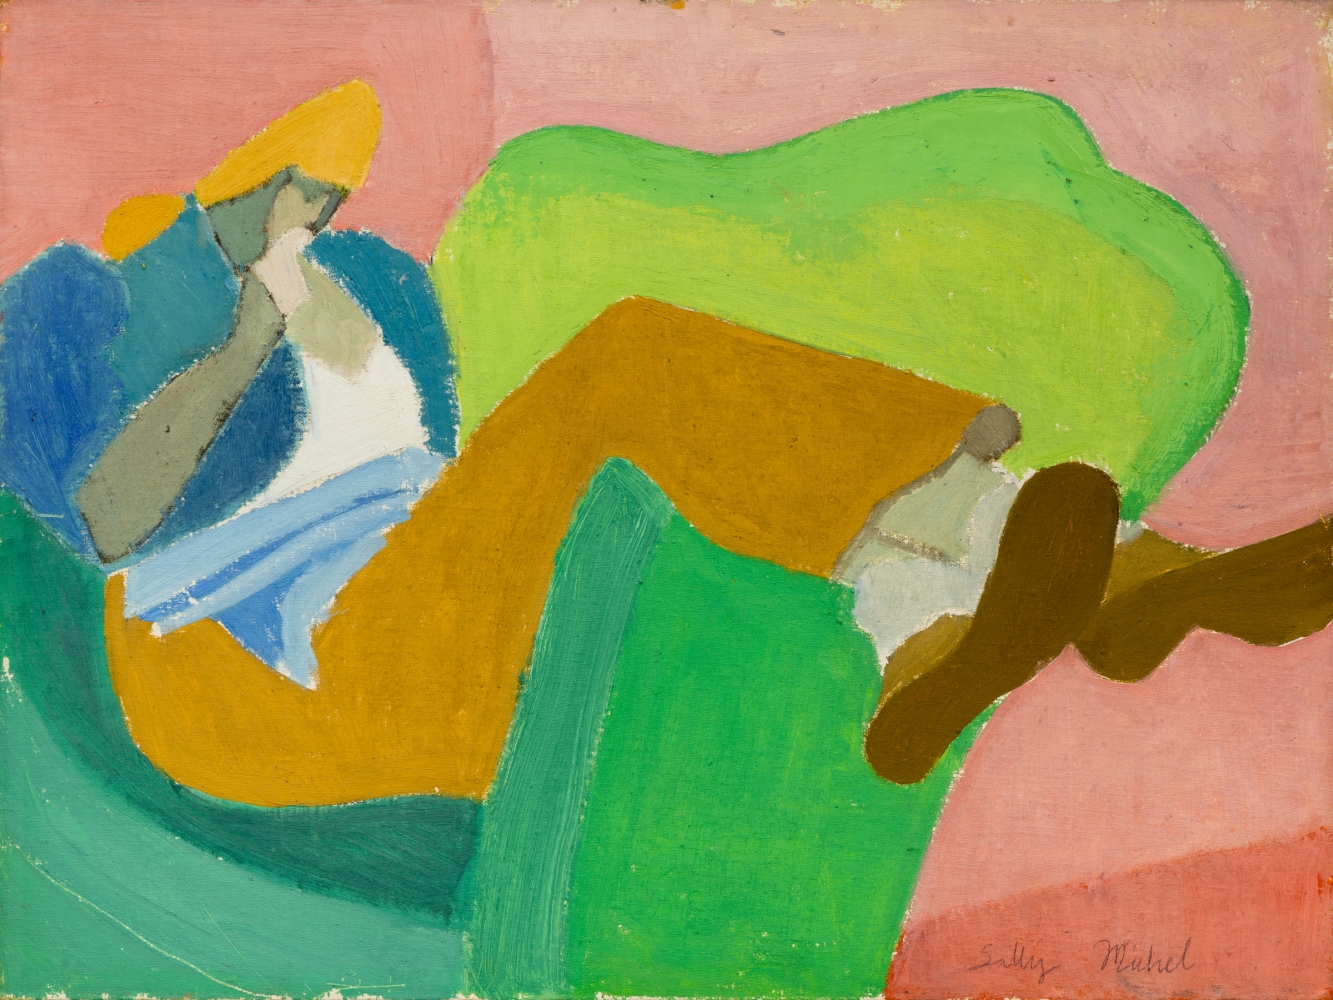 SALLY MICHEL

(1902 - 2003)

Untitled (Relaxing)

n.d.

Oil on canvas

18 x 24 inches

45.7 x 61cm

&amp;nbsp;